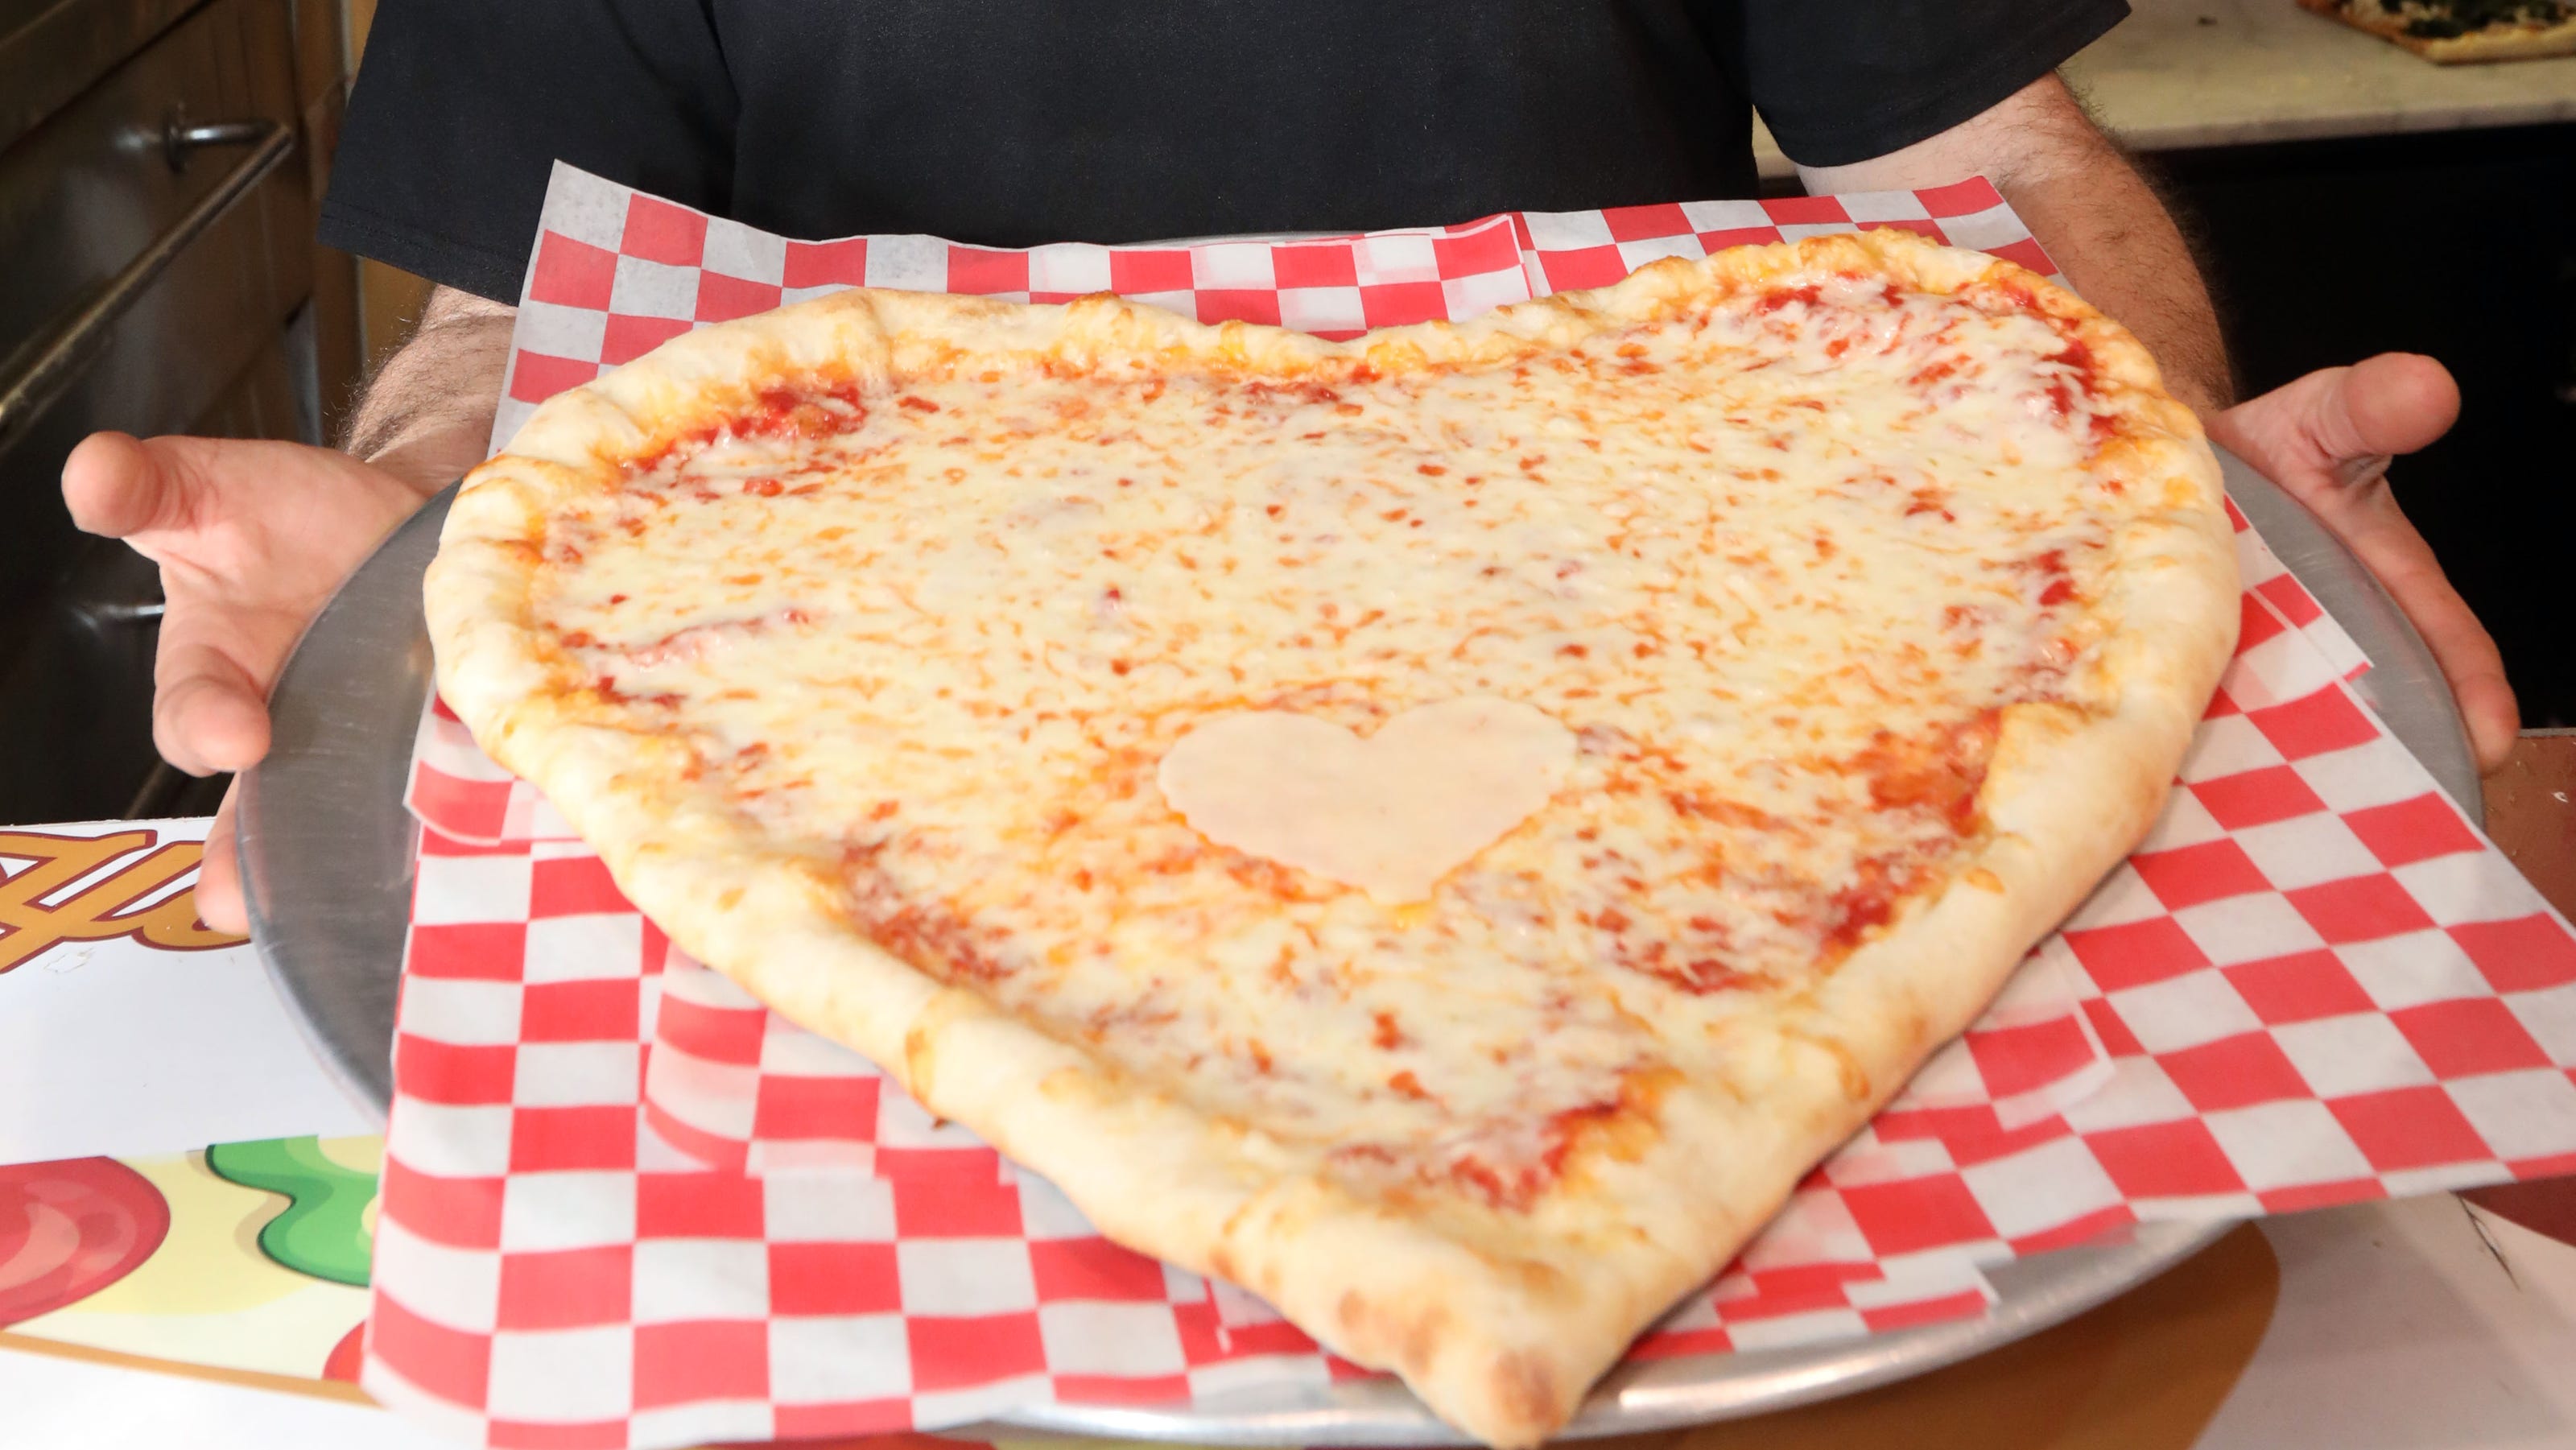 Where To Find Heart Shaped Pizza Super Slice For Valentine S Day